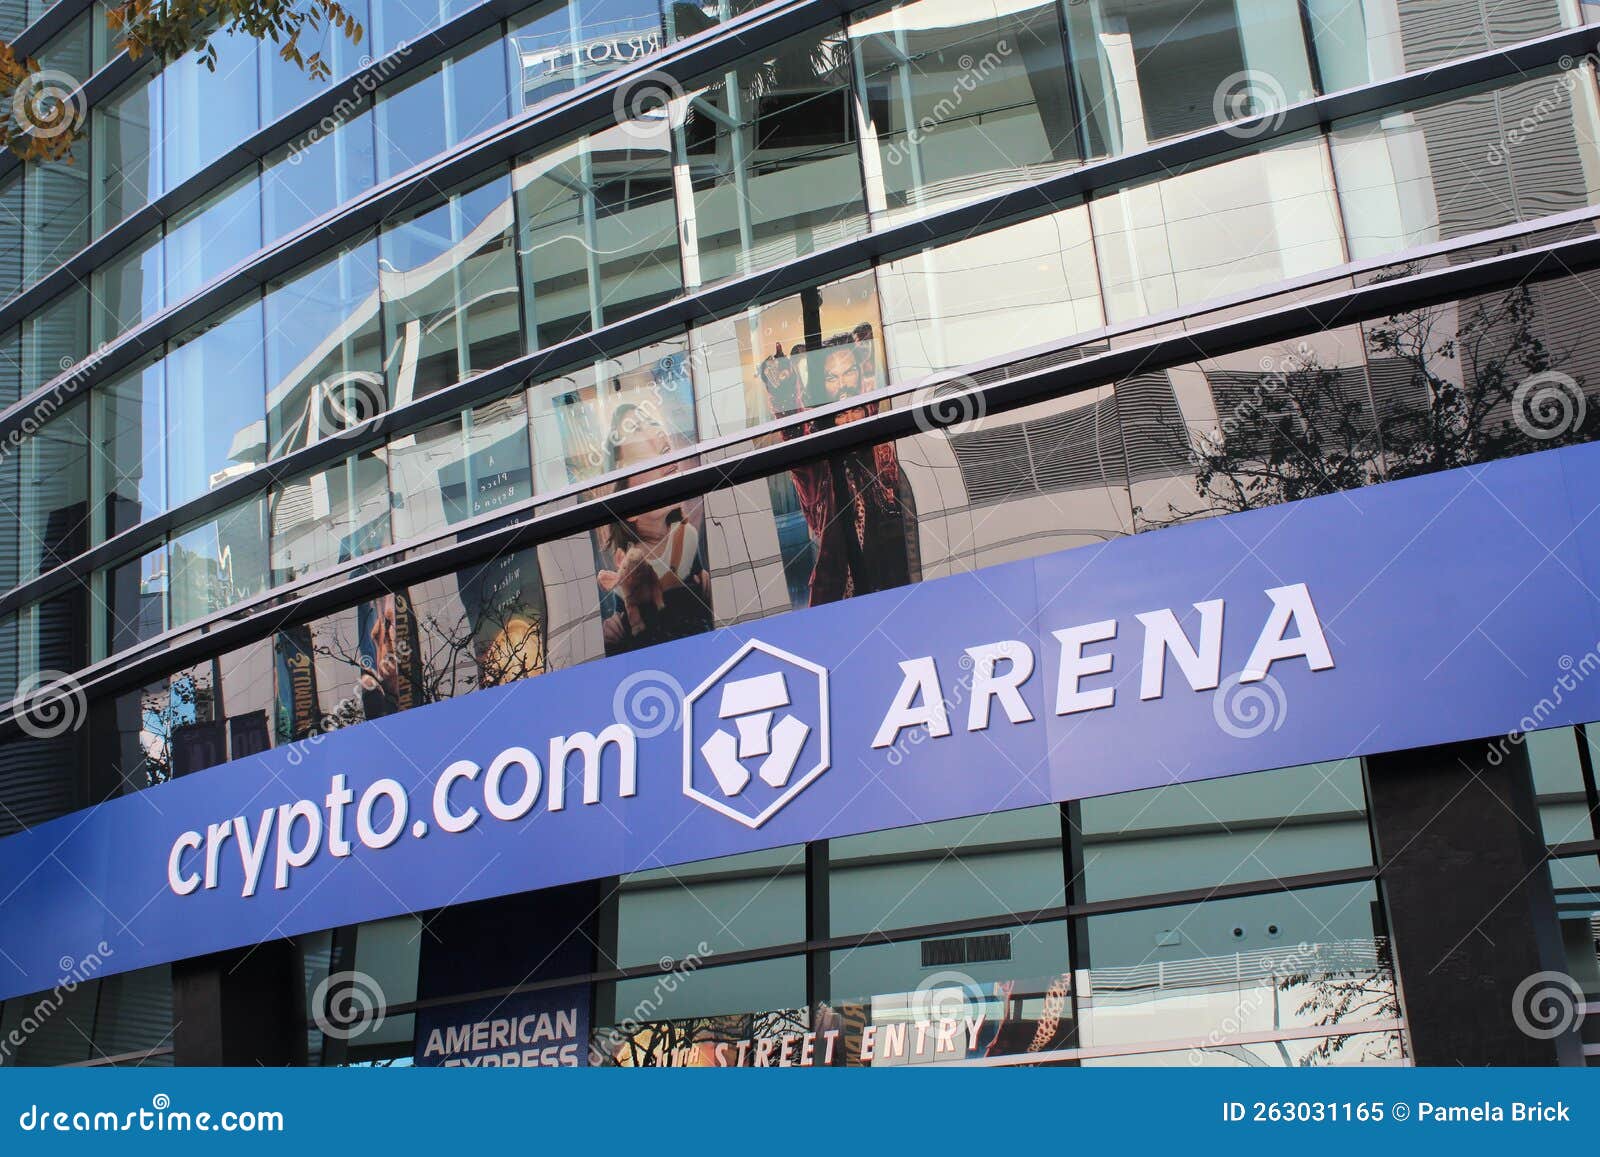 A statue of Magic Johnson dribbling a basketball a Lakers uniform with the number  32 in front of Crypto.com Arena in Los Angeles California USA Stock Photo